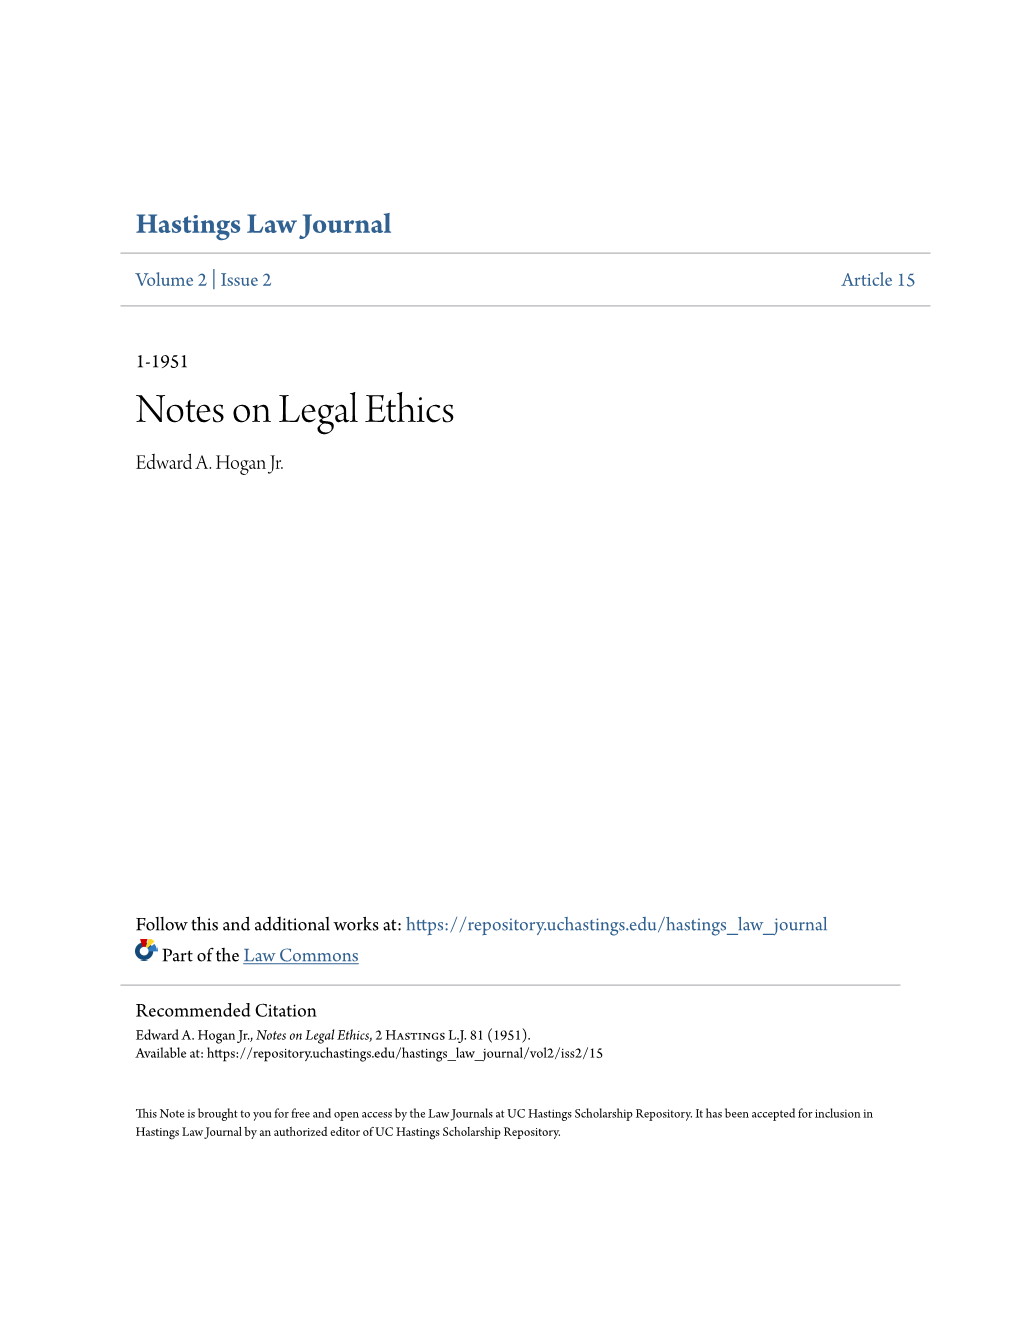 Notes on Legal Ethics Edward A